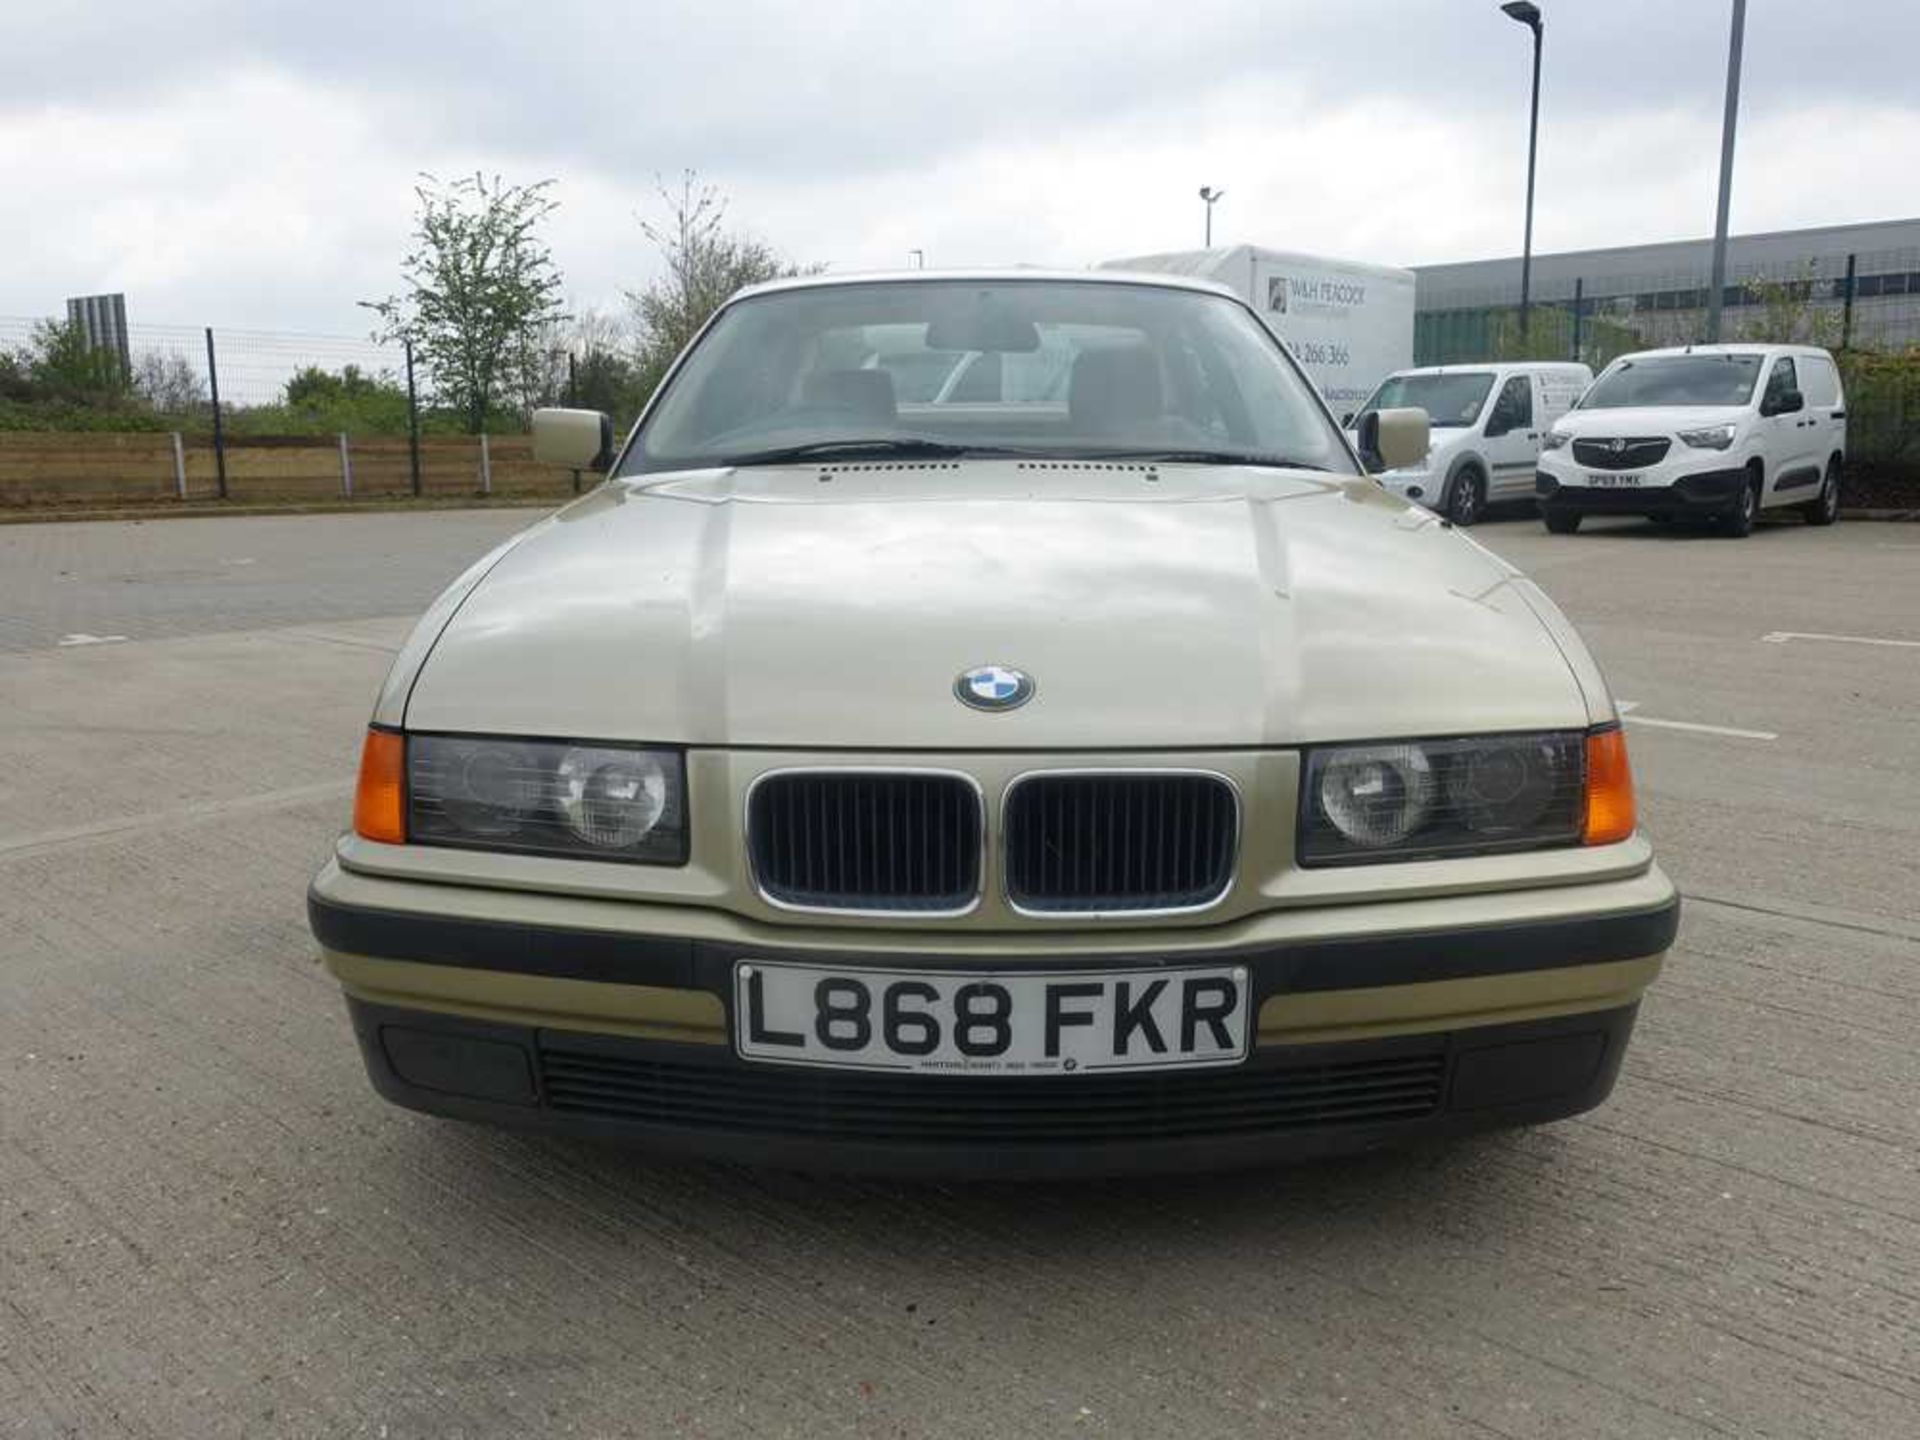 BMW 318 i S Auto Coupe in gold, first registered 16.04.1994, registration plate L868 FKR, 2 door, - Image 3 of 12